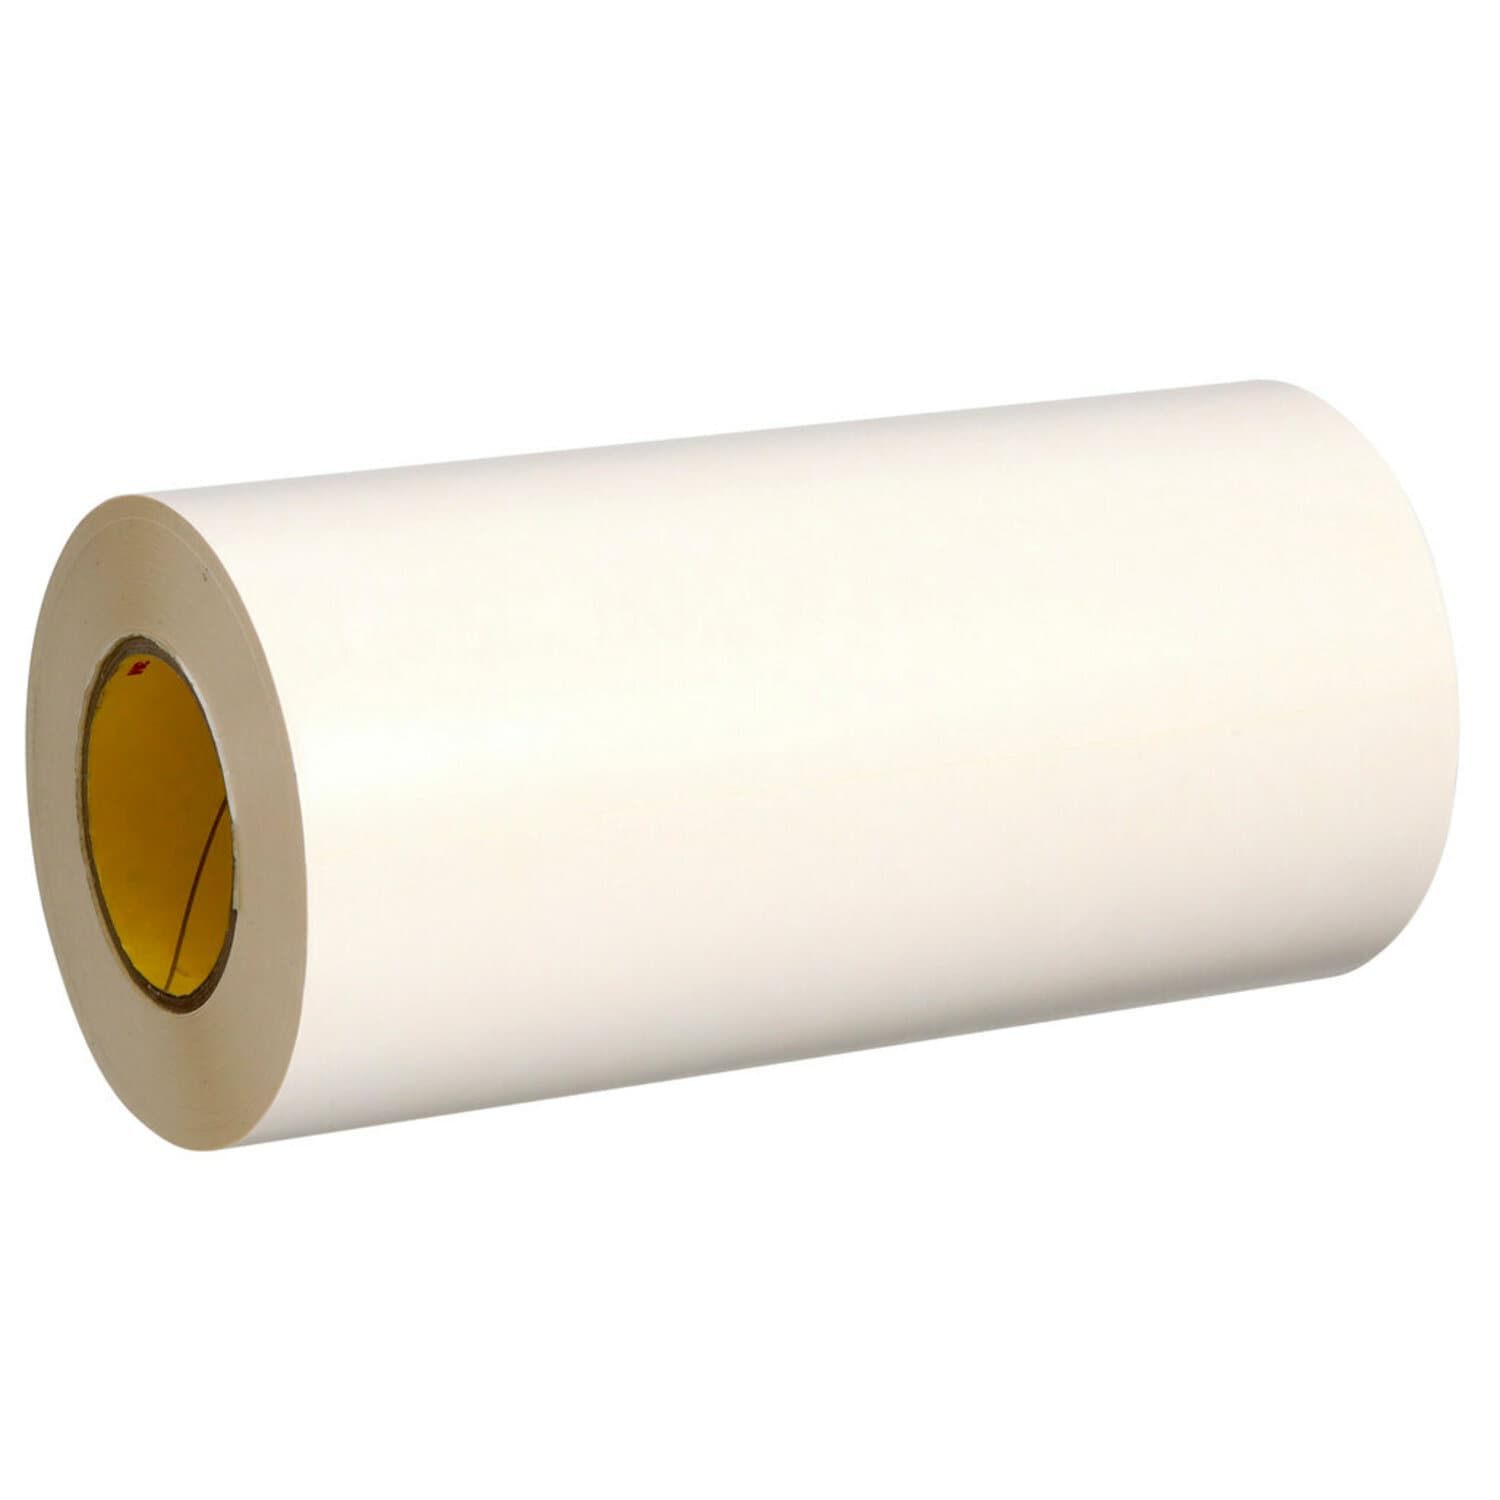 7100170668 - 3M Double Coated Polyester Tape 442KW, 34 in x 108 yds with No Liner